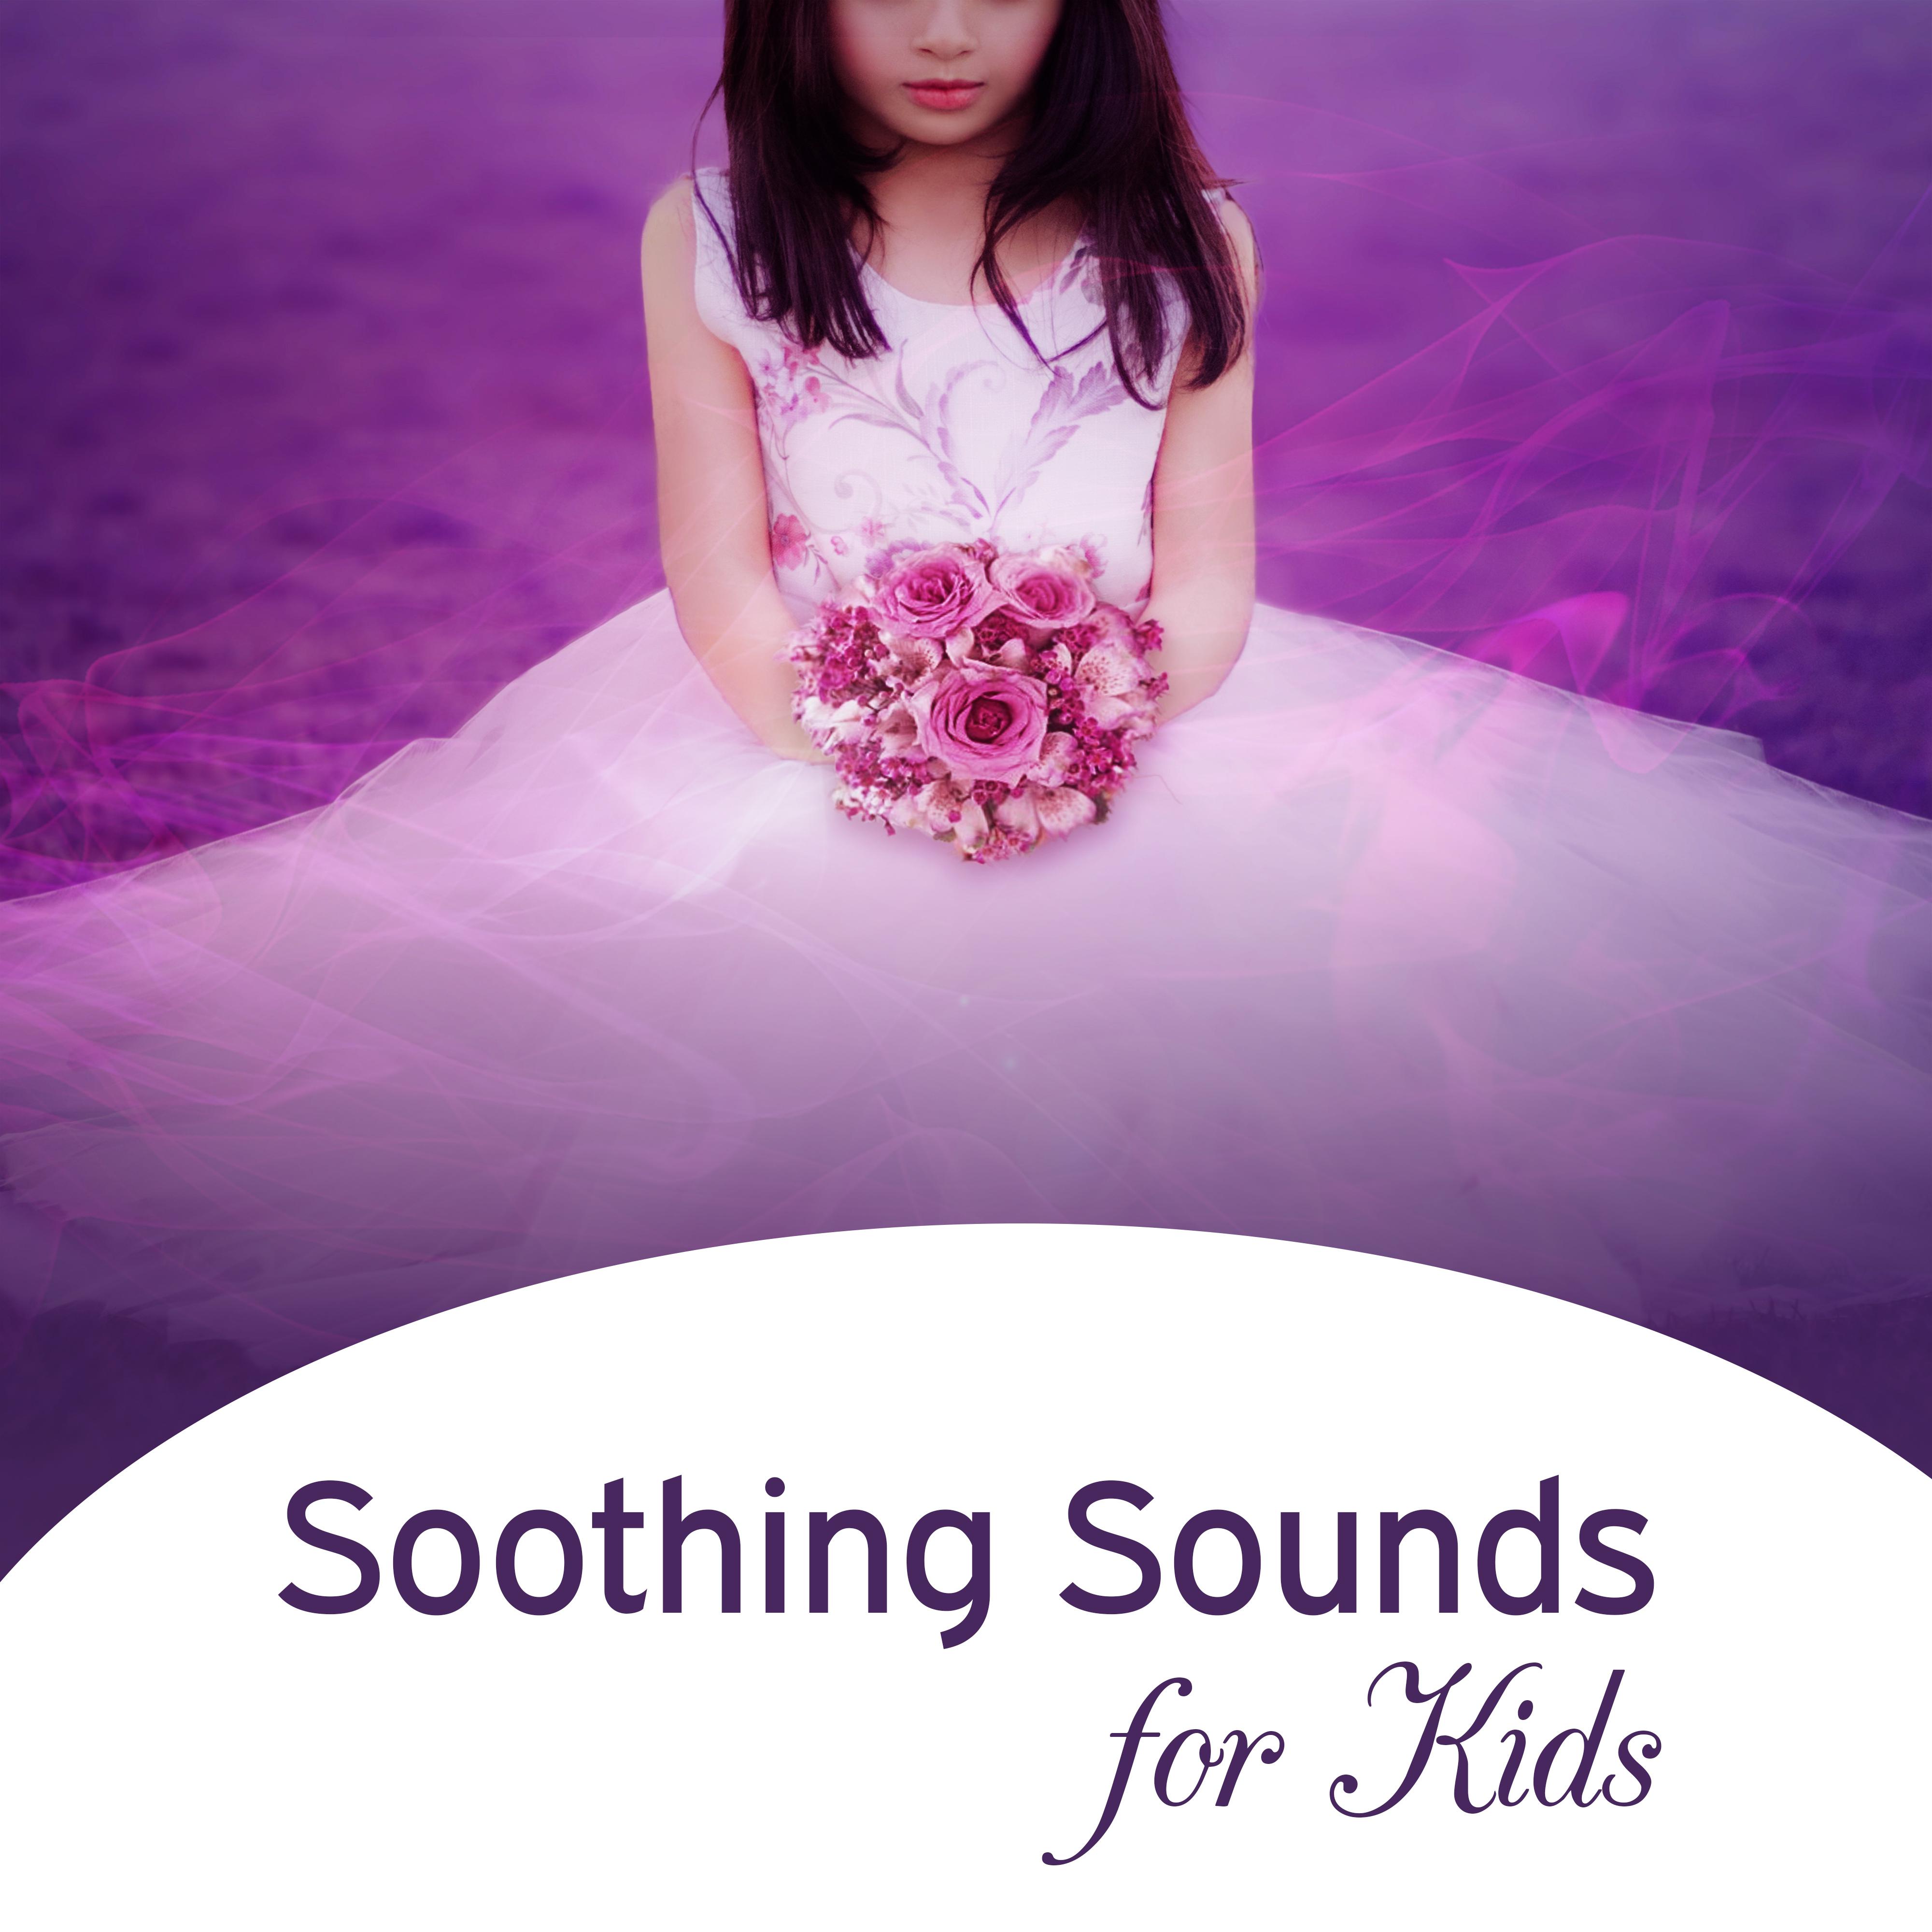 Soothing Sounds for Kids – Instrumental Classical Music, Pure Relaxation, Sweet Lullabies, Baby Music, Bedtime